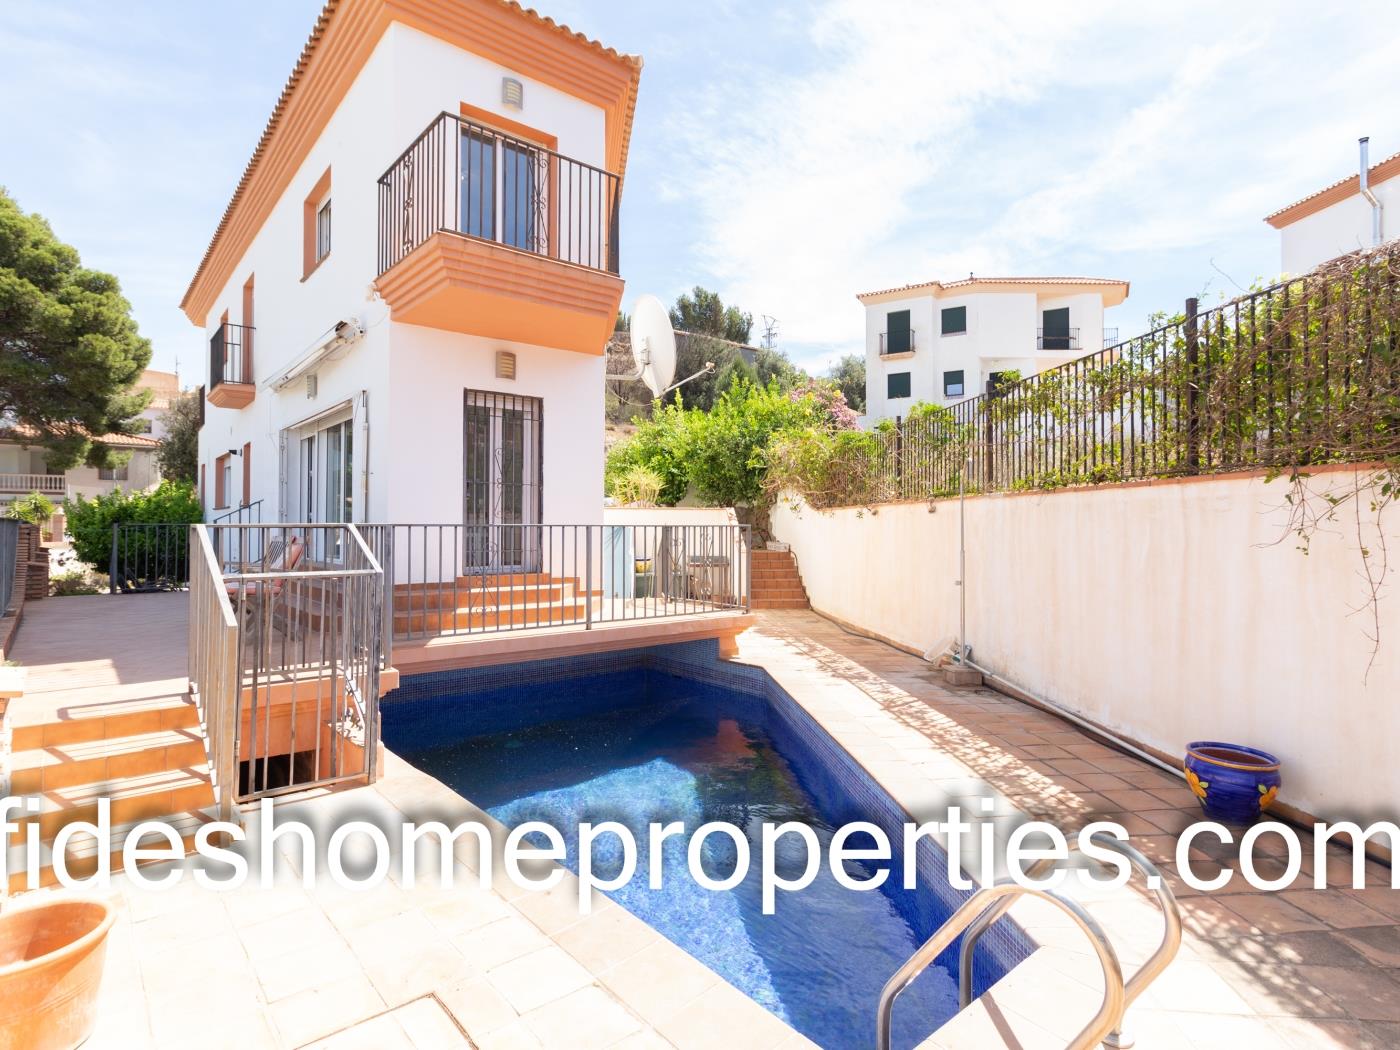 Detached Villa with Terrace, Garden, Pool, and Magnificent Views in Lecrín. in Talará